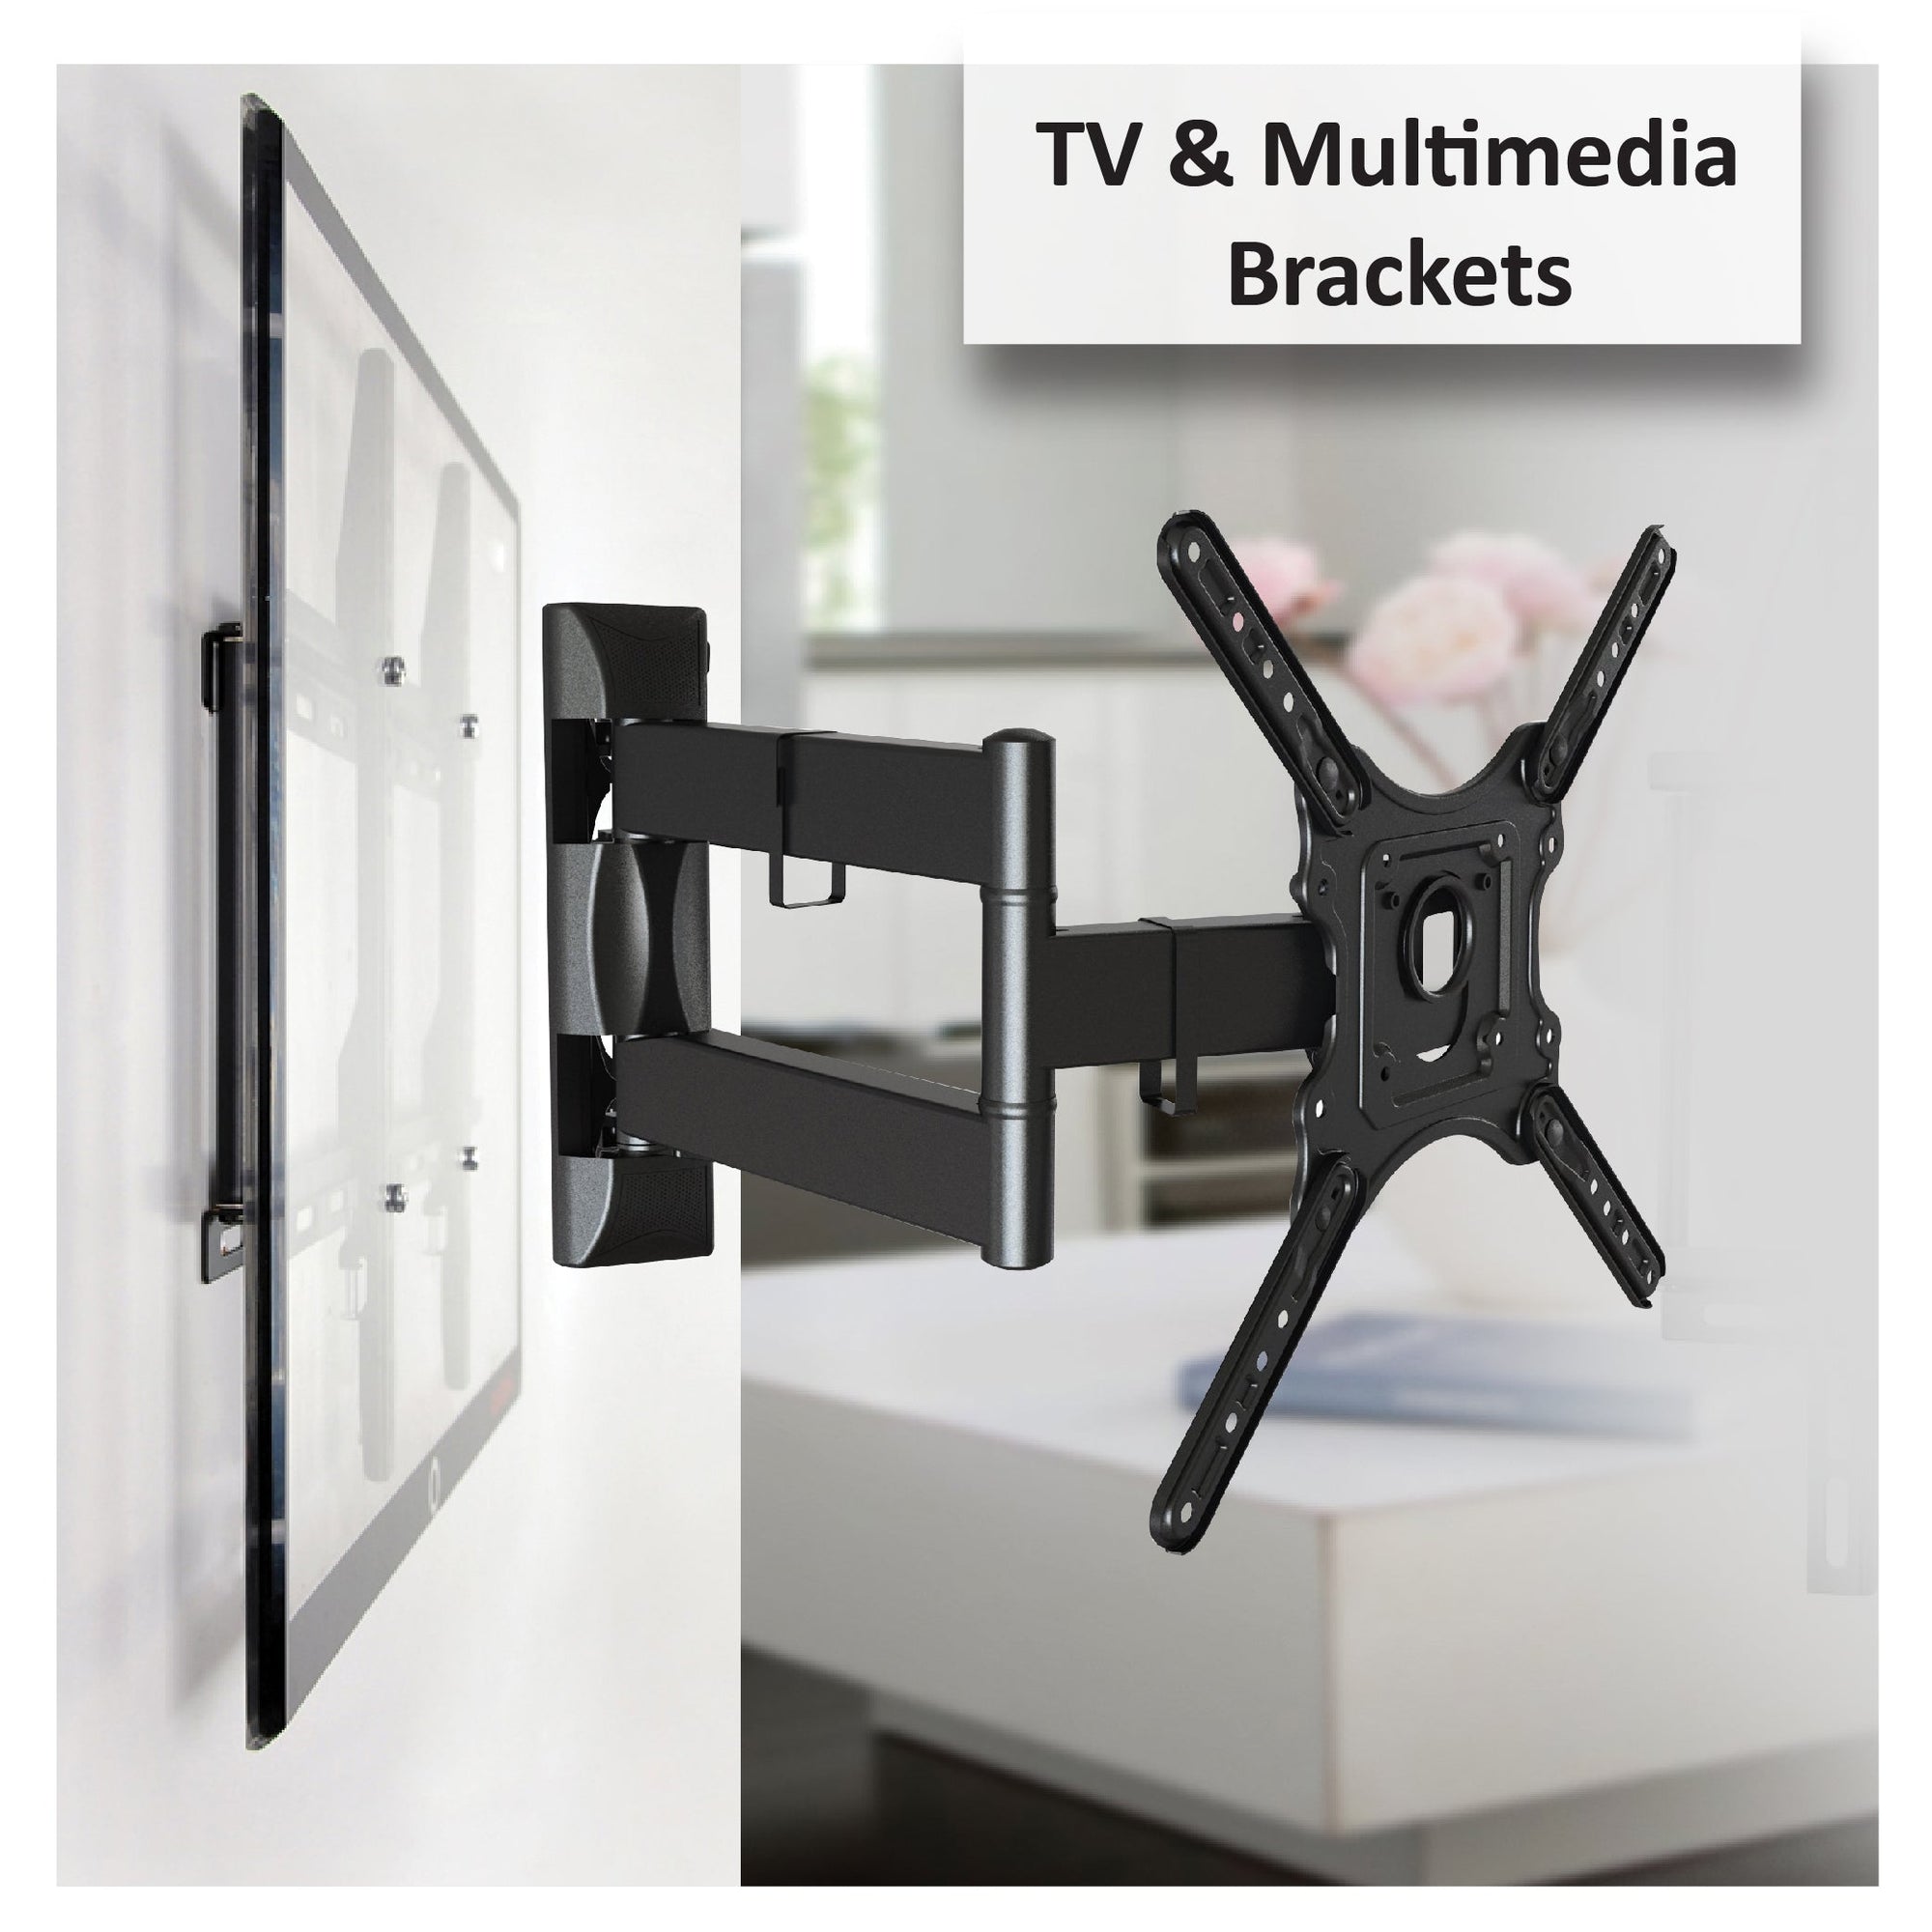 Mcoco TV Brackets - Secure and Stylish Wall Mounting Solutions for Your Television